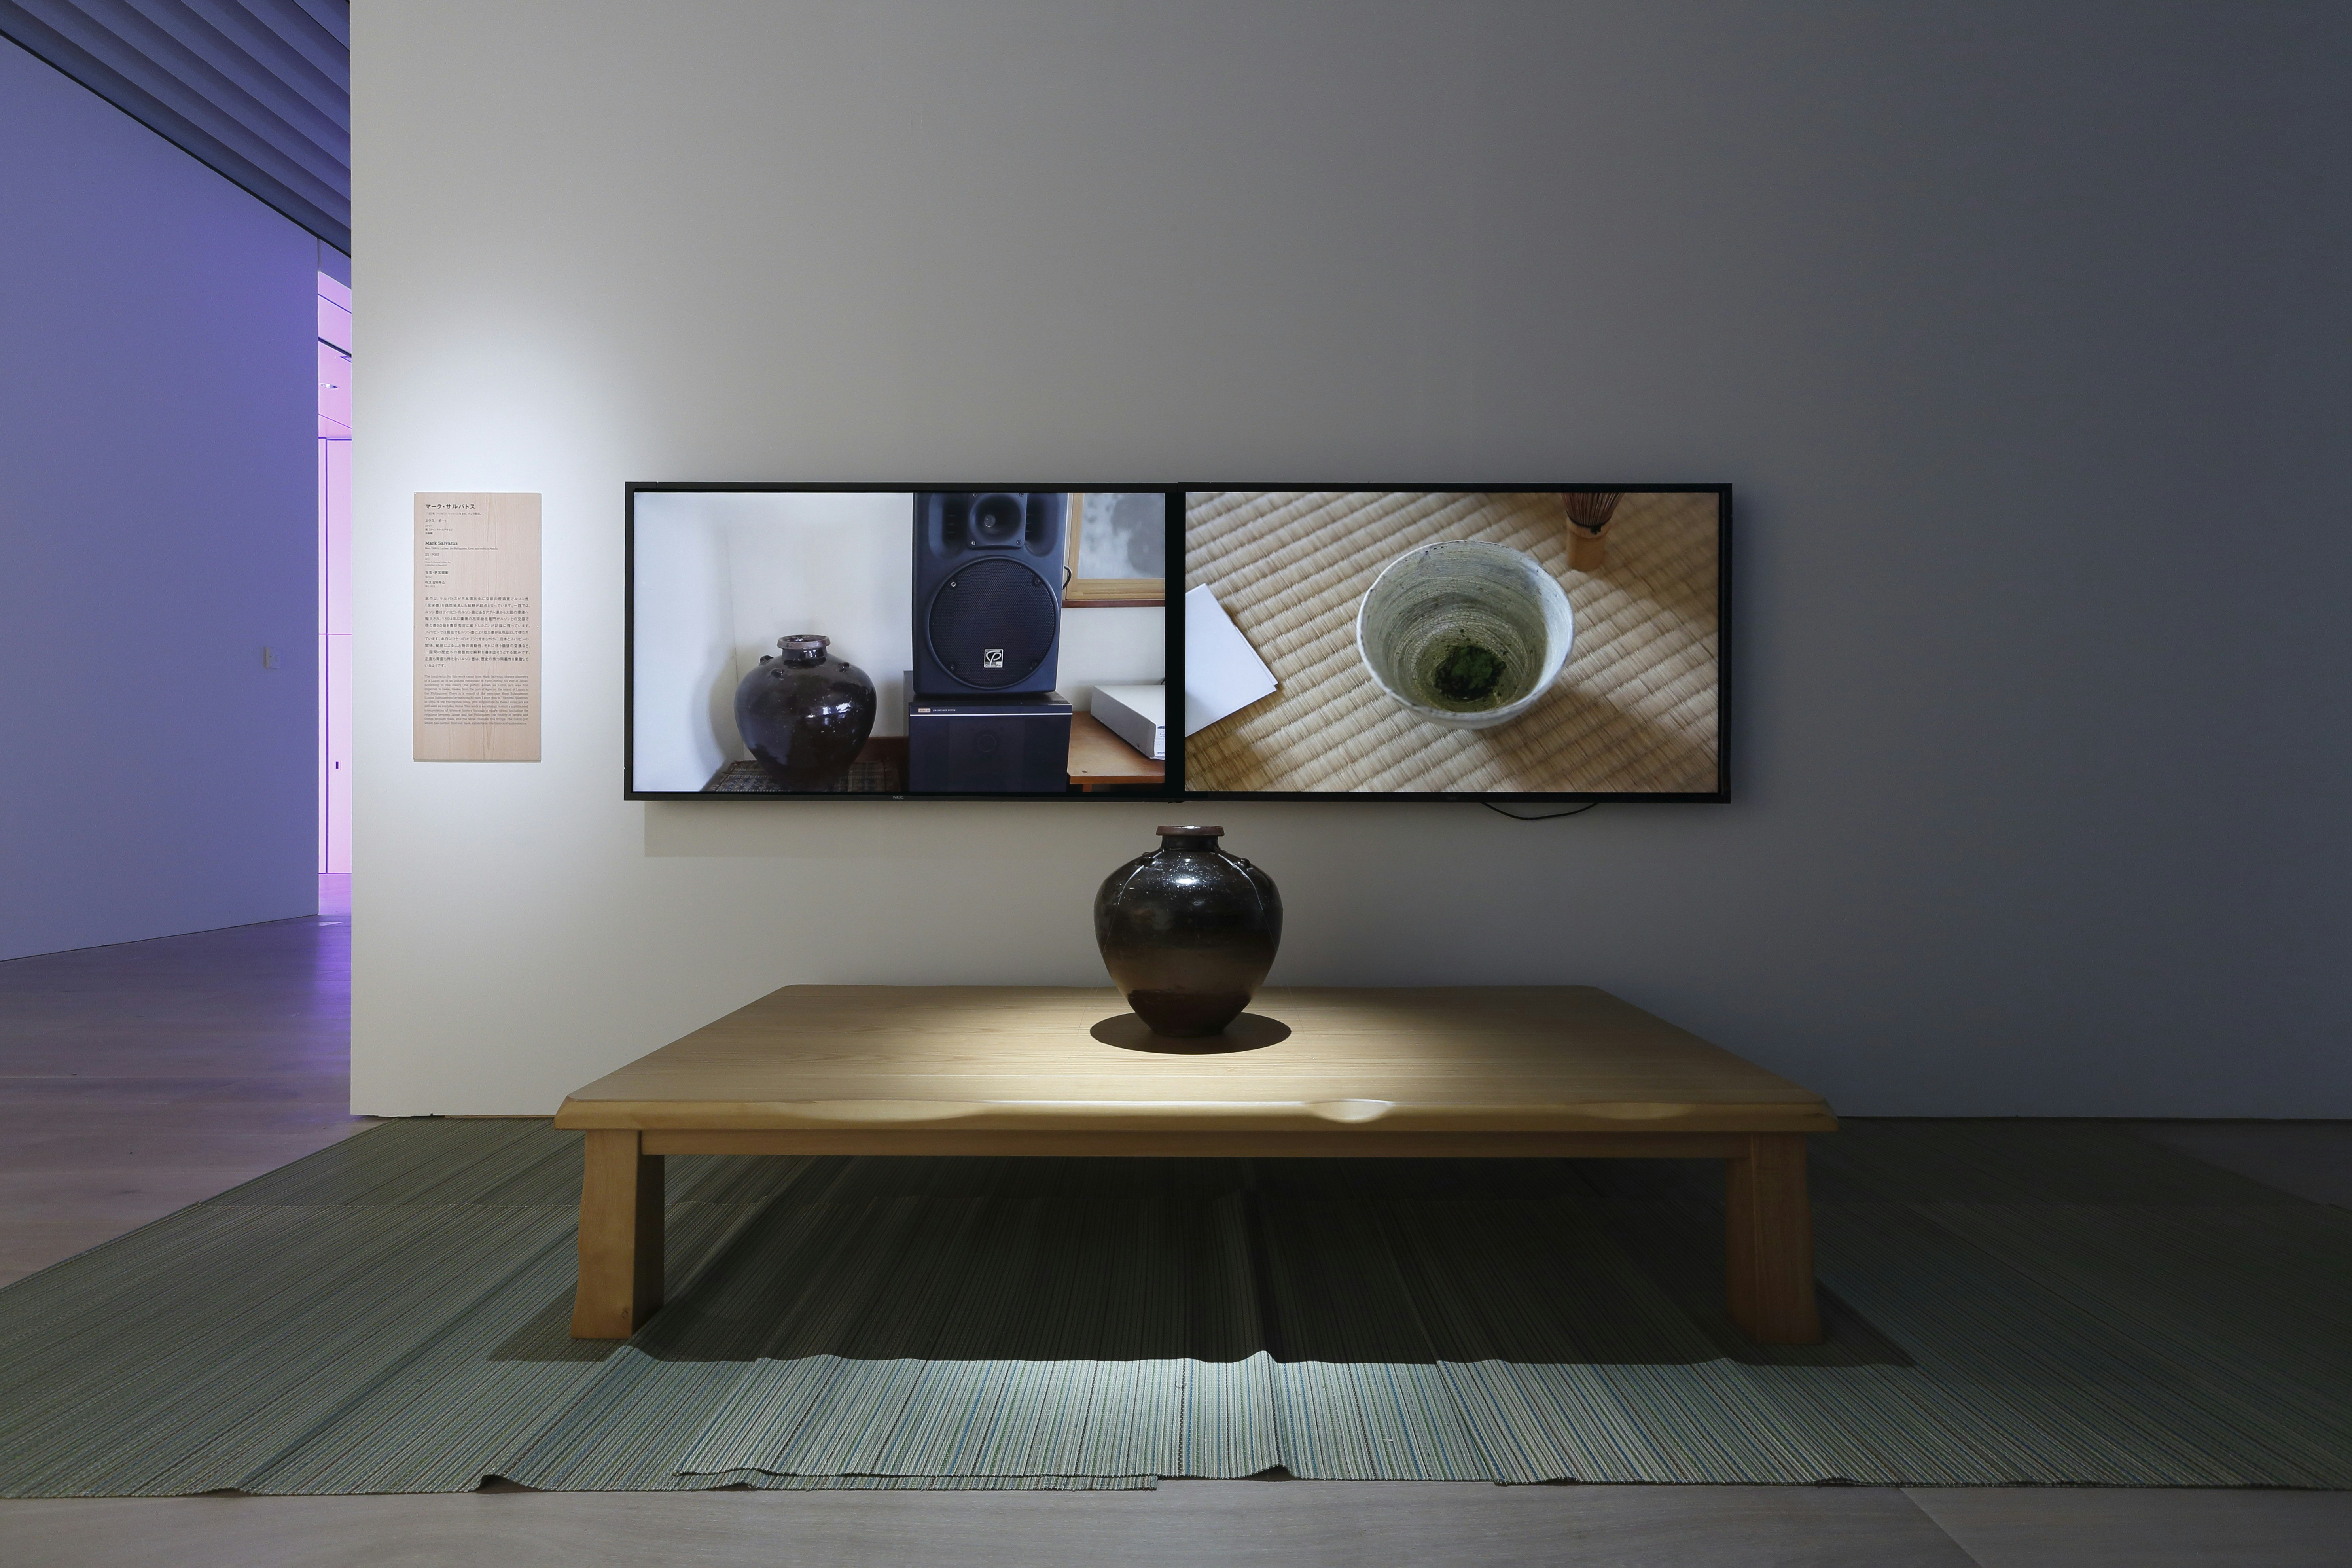 A black vase positioned in the middle of a wooden platform with a sole spotlight on it. Behind are two TV monitors, one showing the black vase next to a speaker, the other showing the inside of a teacup on a tatami mat.